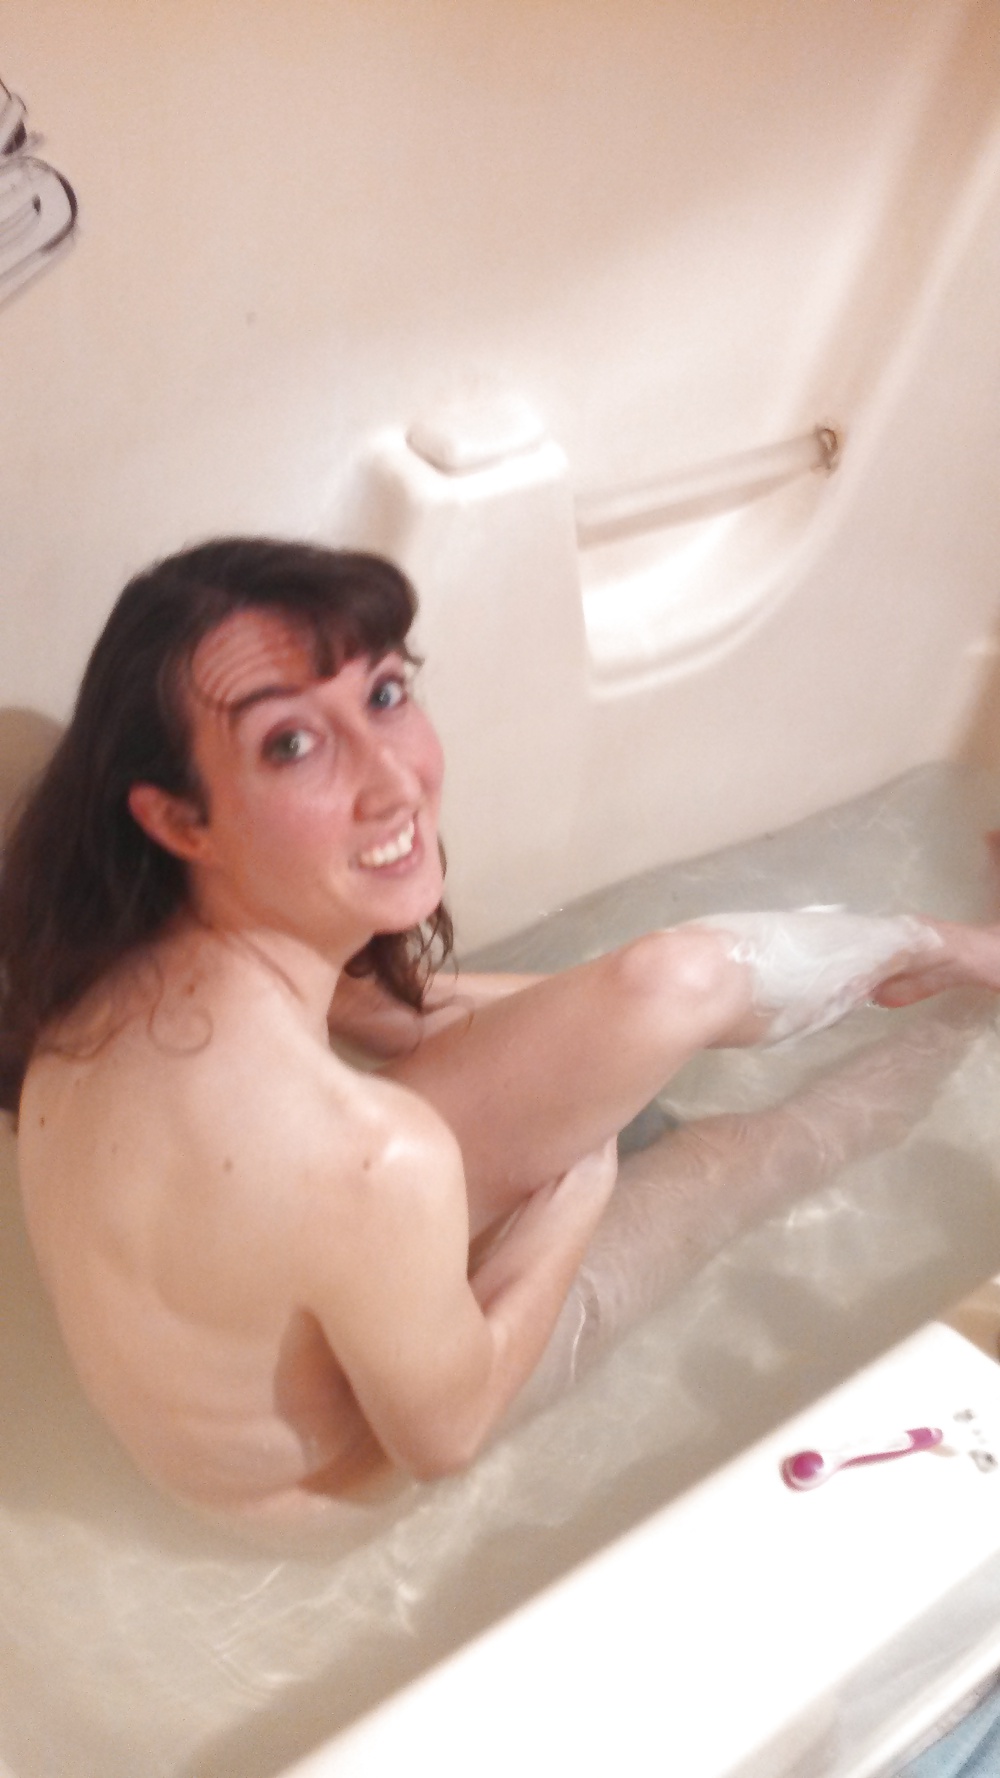 My hot wife taking hot bath during big ice storm. #26820836